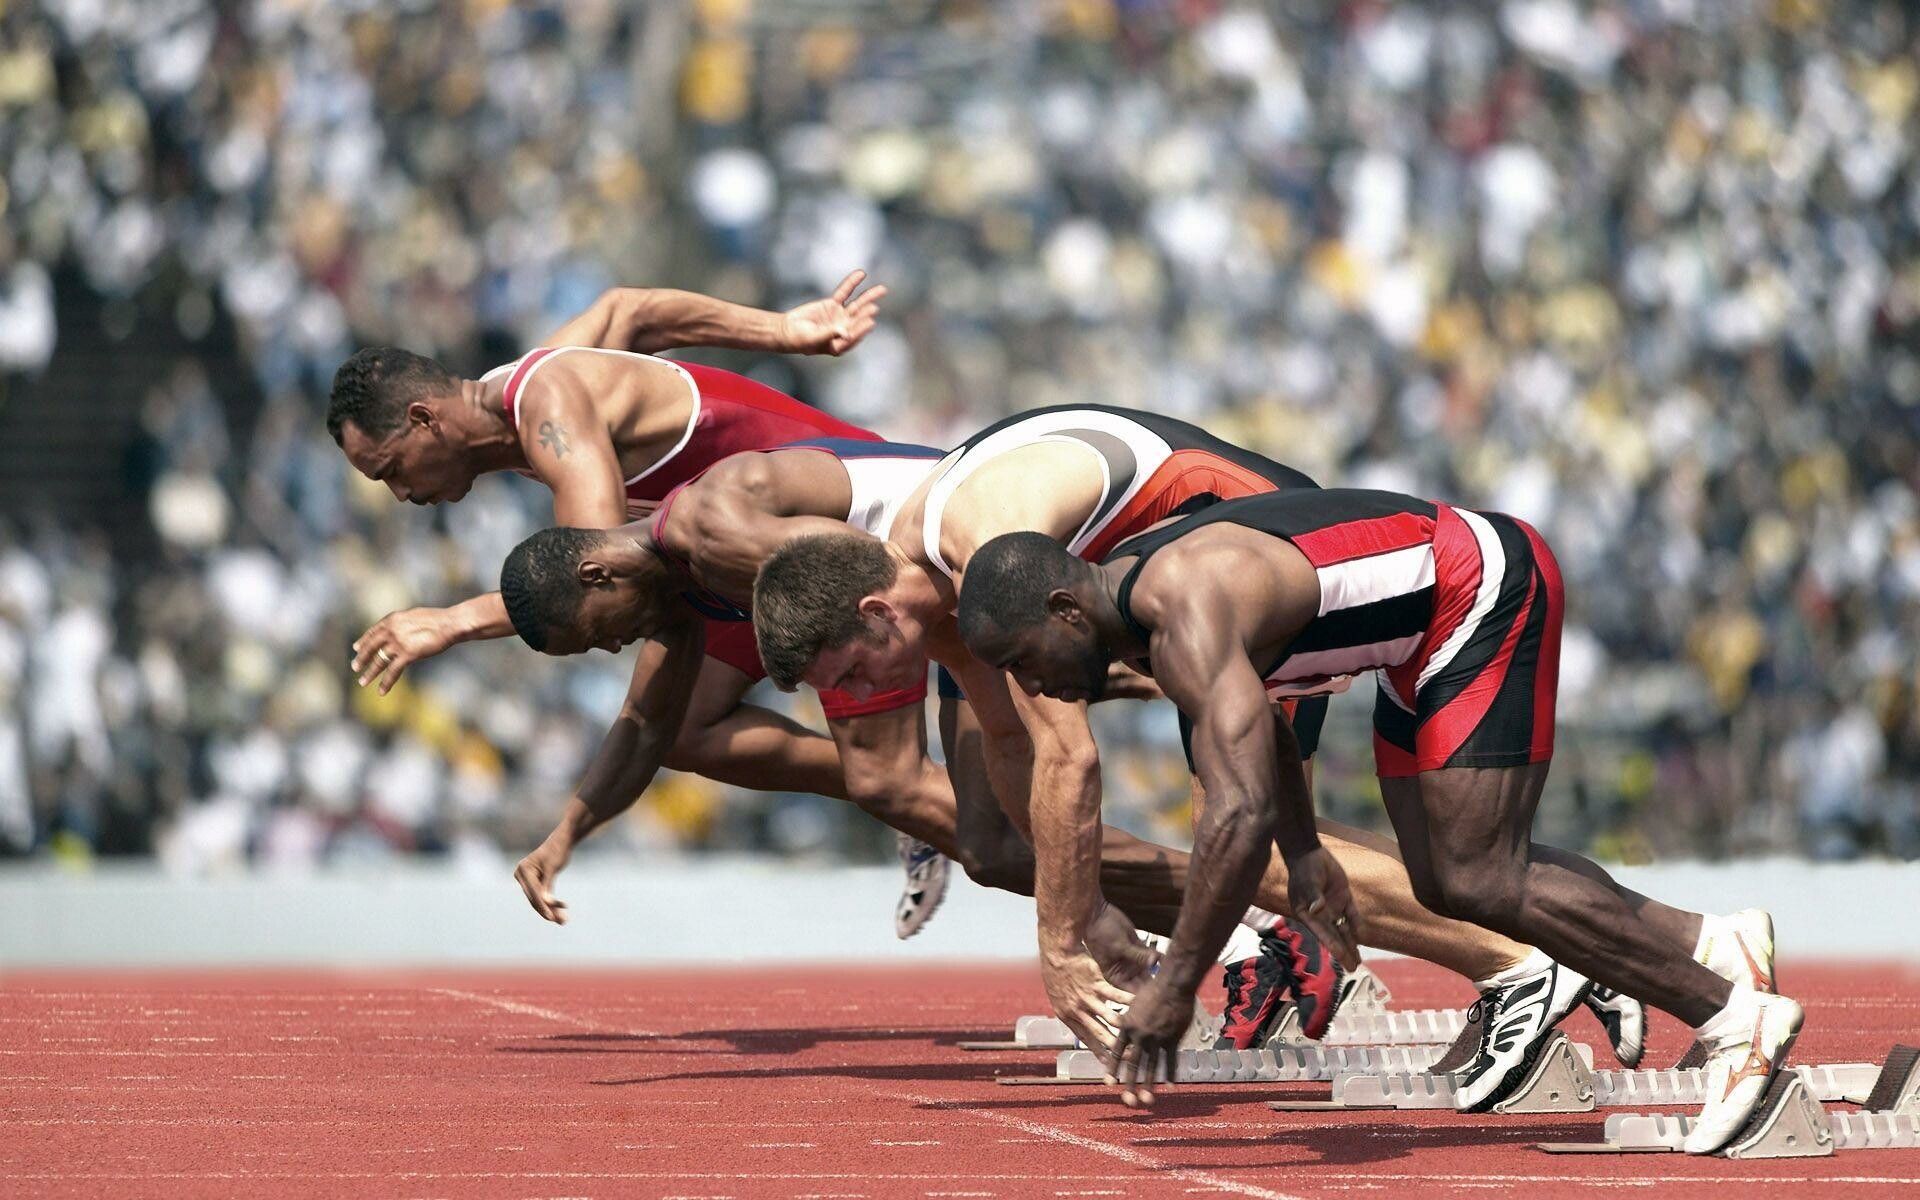 Athletes in motion, Sporting achievements, Records broken, Athletic excellence, 1920x1200 HD Desktop